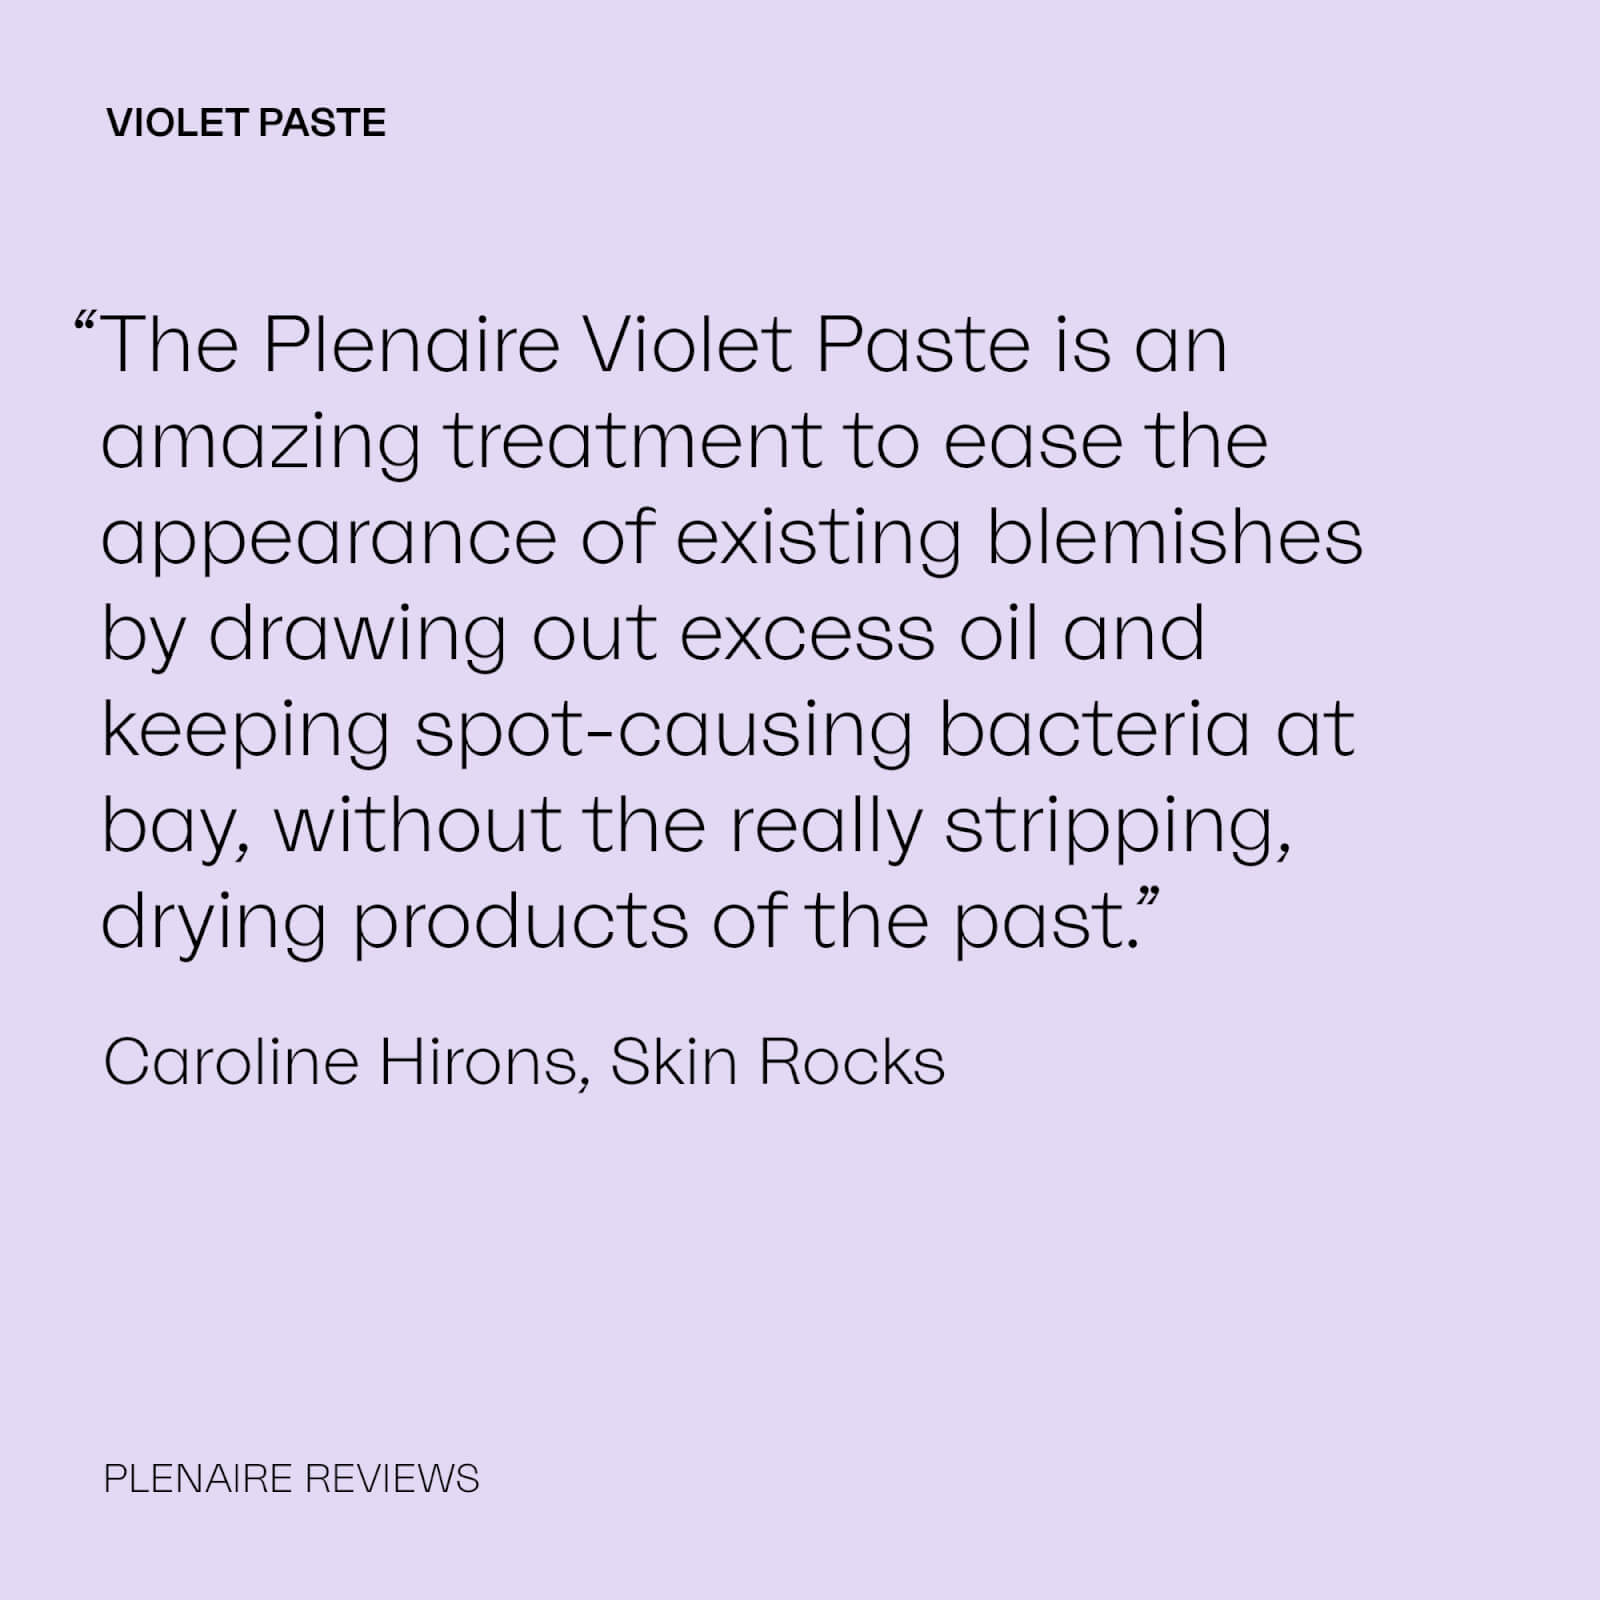 VIOLET PASTE “The Plenaire Violet Paste is an amazing treatment to ease the appearance of existing blemishes by drawing out excess oil and keeping spot-causing bacteria at bay, without the really stripping, drying products of the past.